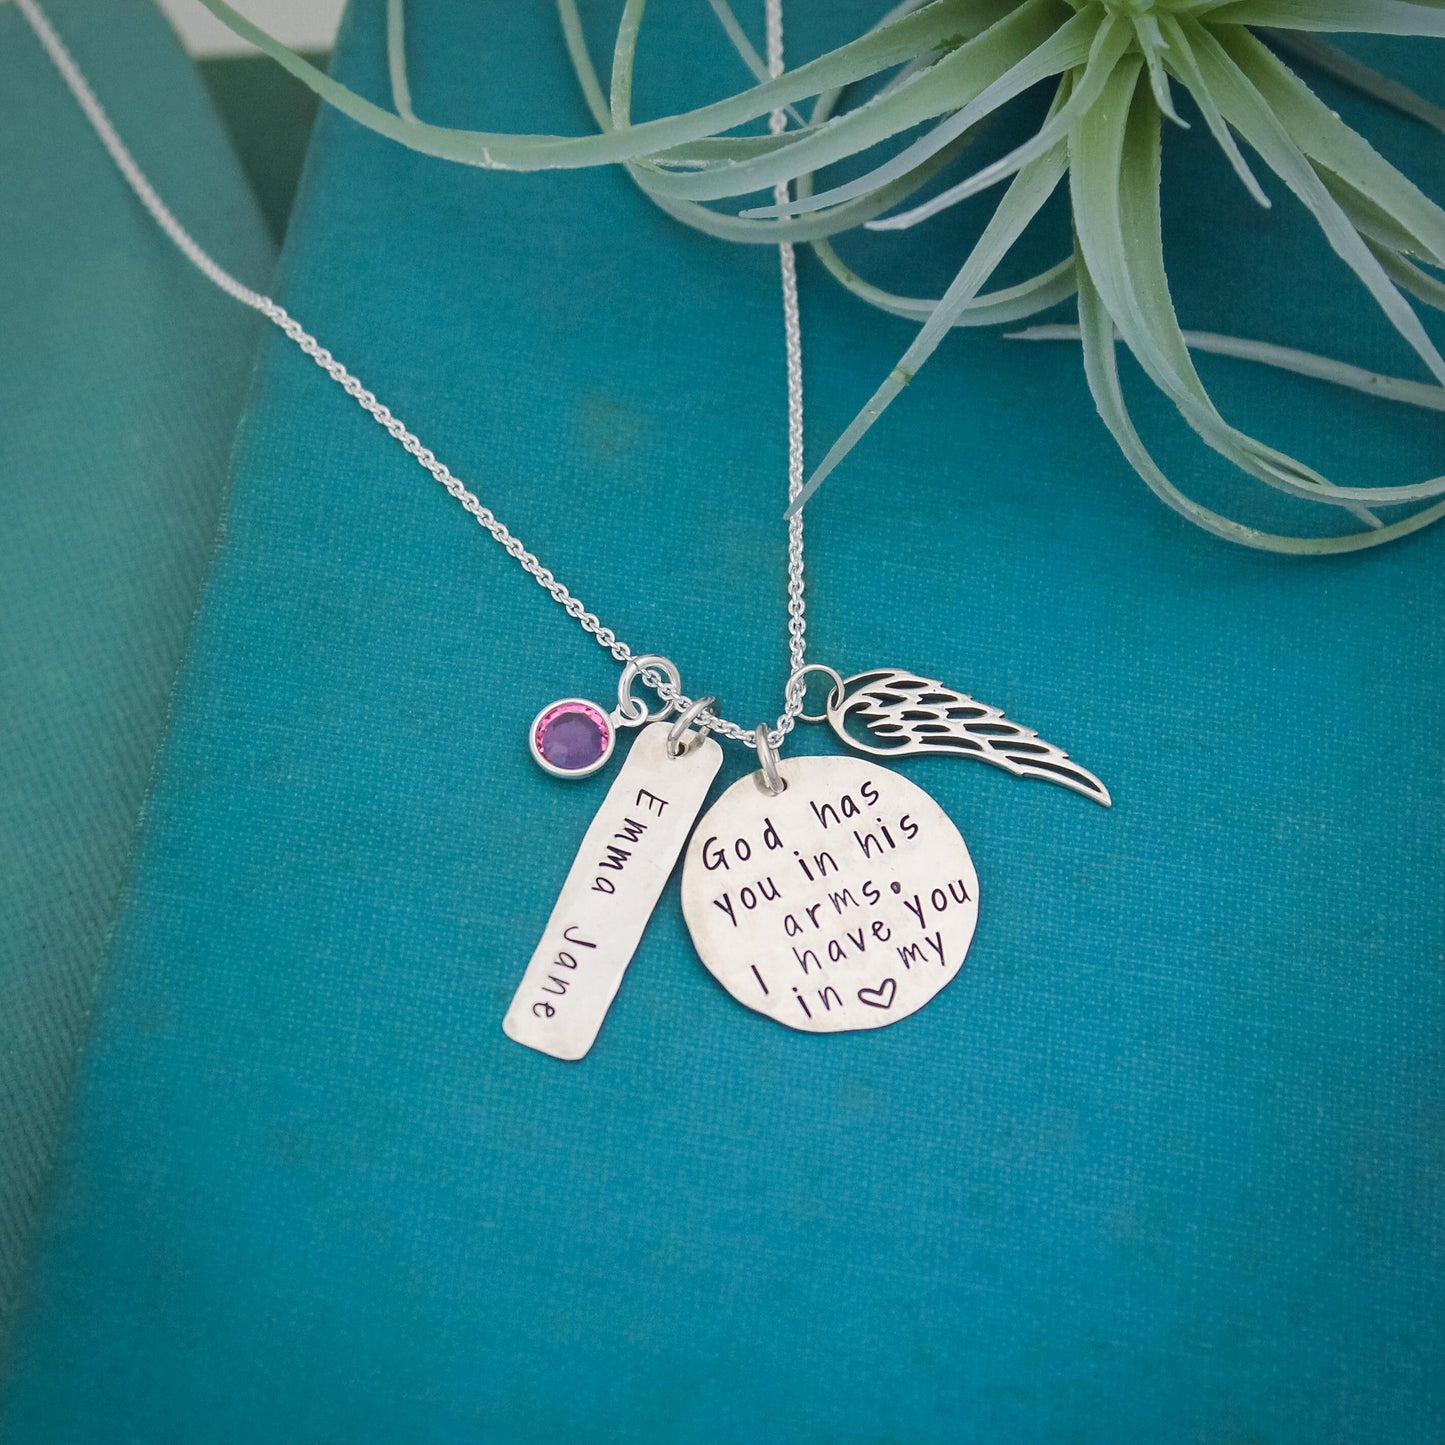 Baby Angel Necklace, Angel Wing Necklace, Remembrance Jewelry, Memorial Jewelry, Miscarriage, Hand Stamped Personalized Jewelry